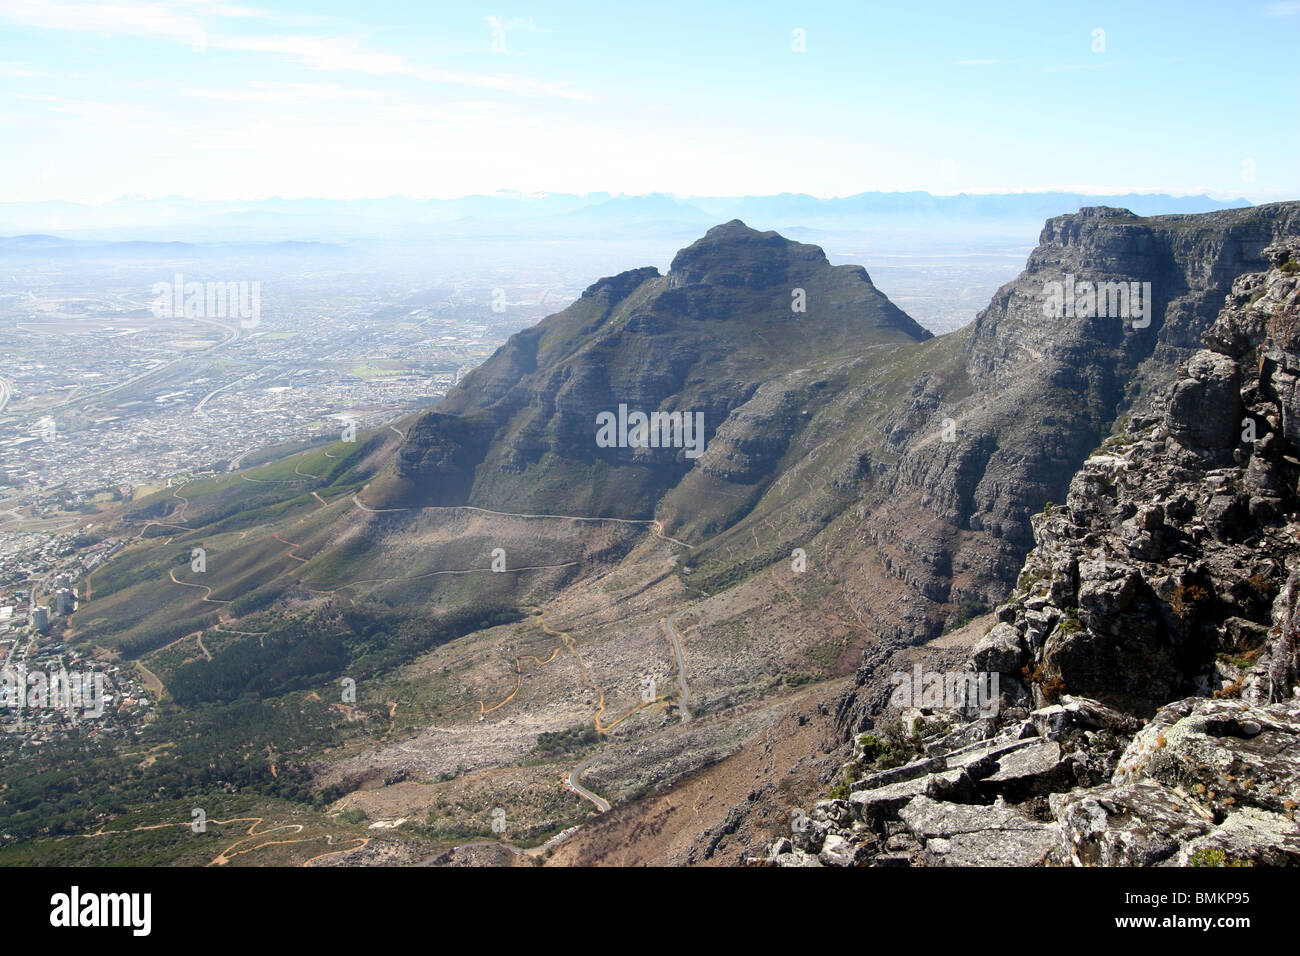 Panoramic view of Devil's Peak and Cape Town from Table Mountain, South Africa. Stock Photo